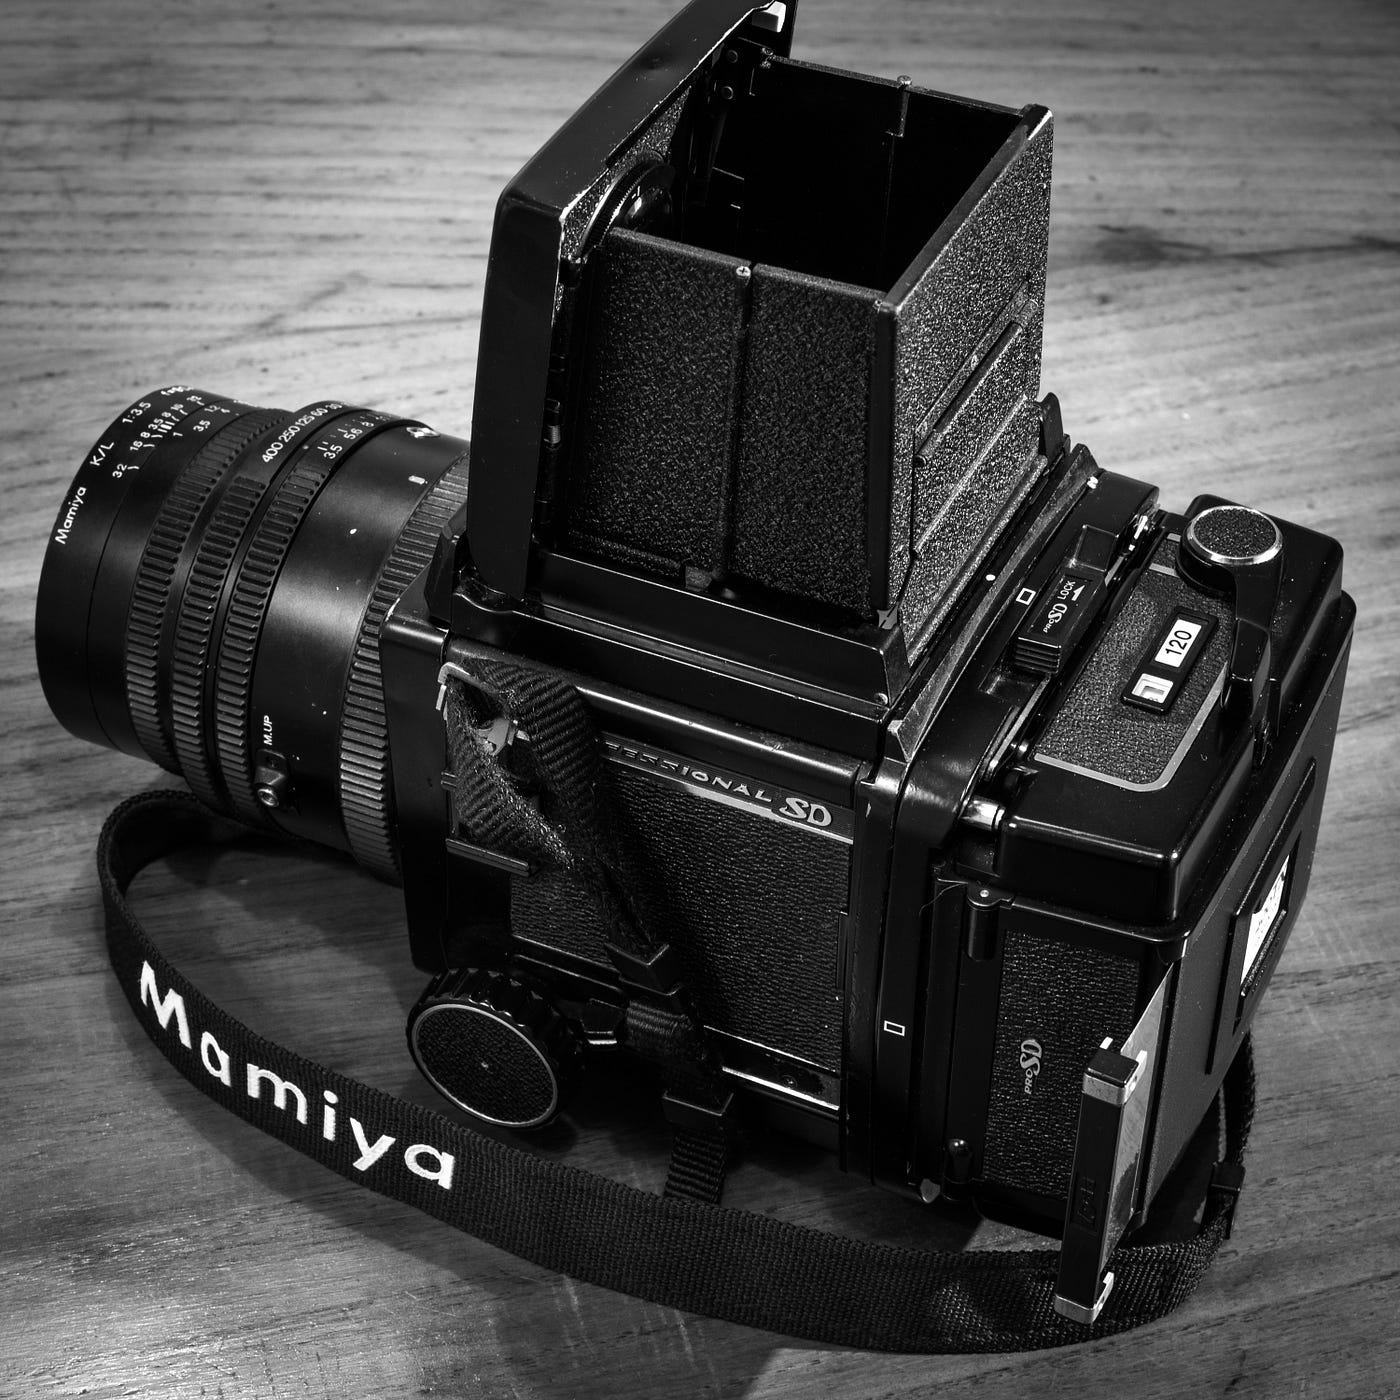 The Awesome Mamiya RB67 Professional SD | by Miguel Feuggin | Full